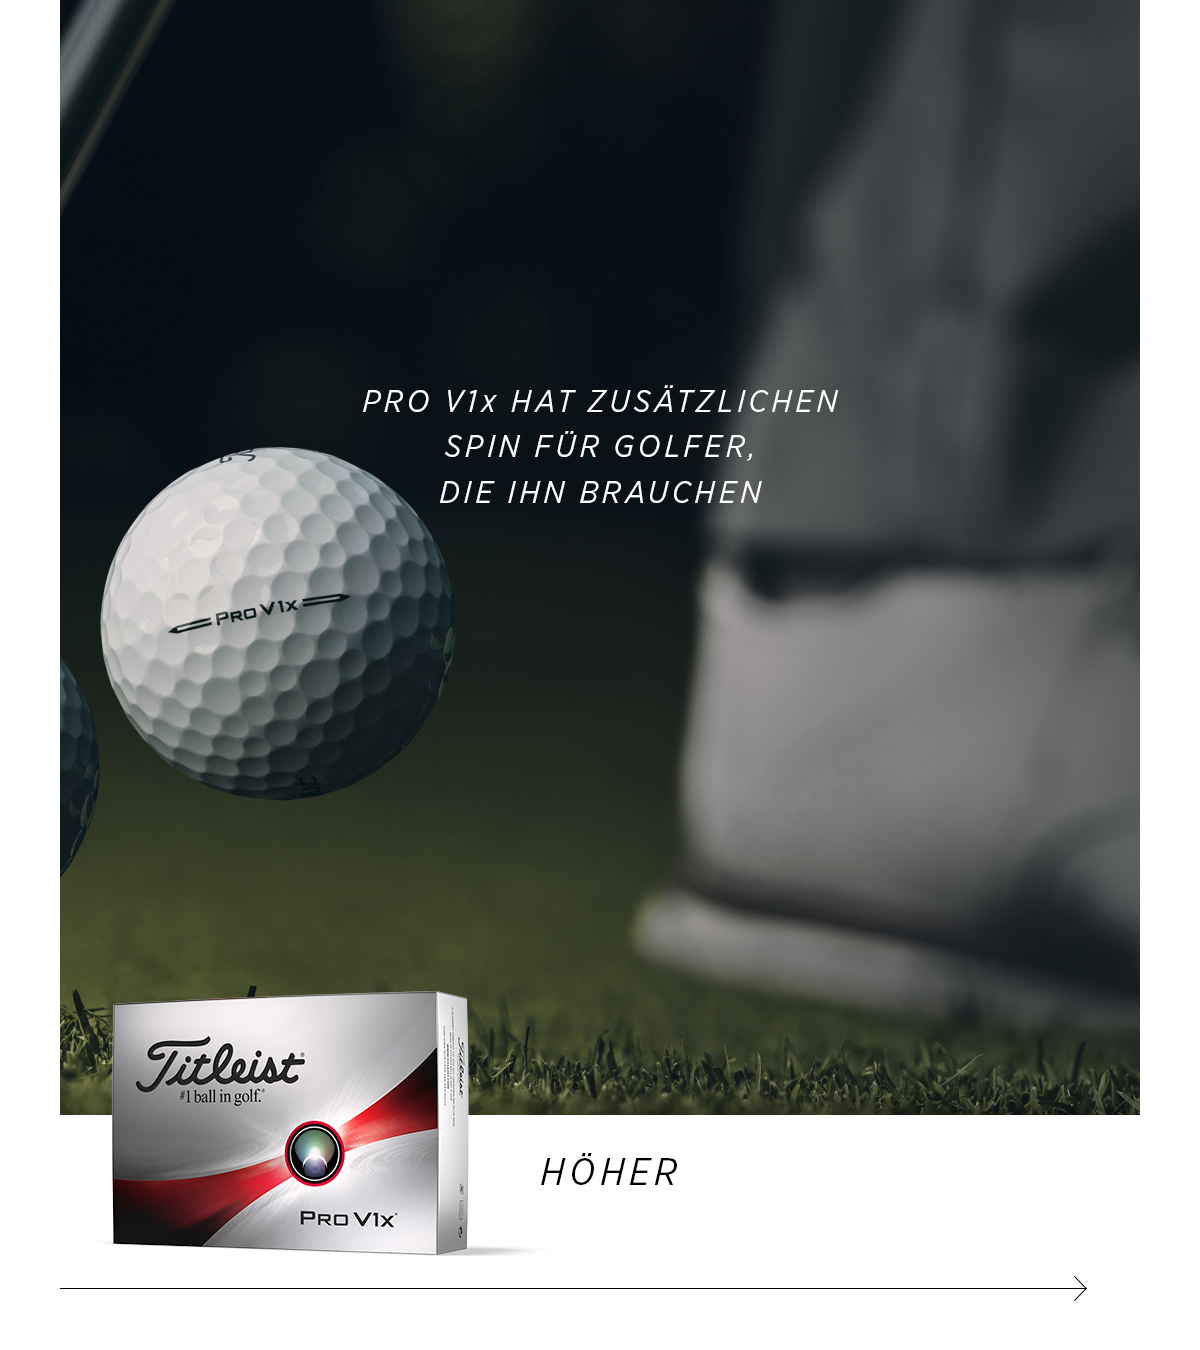 Pro V1<span>x</span> has additional spin for golfers who need it